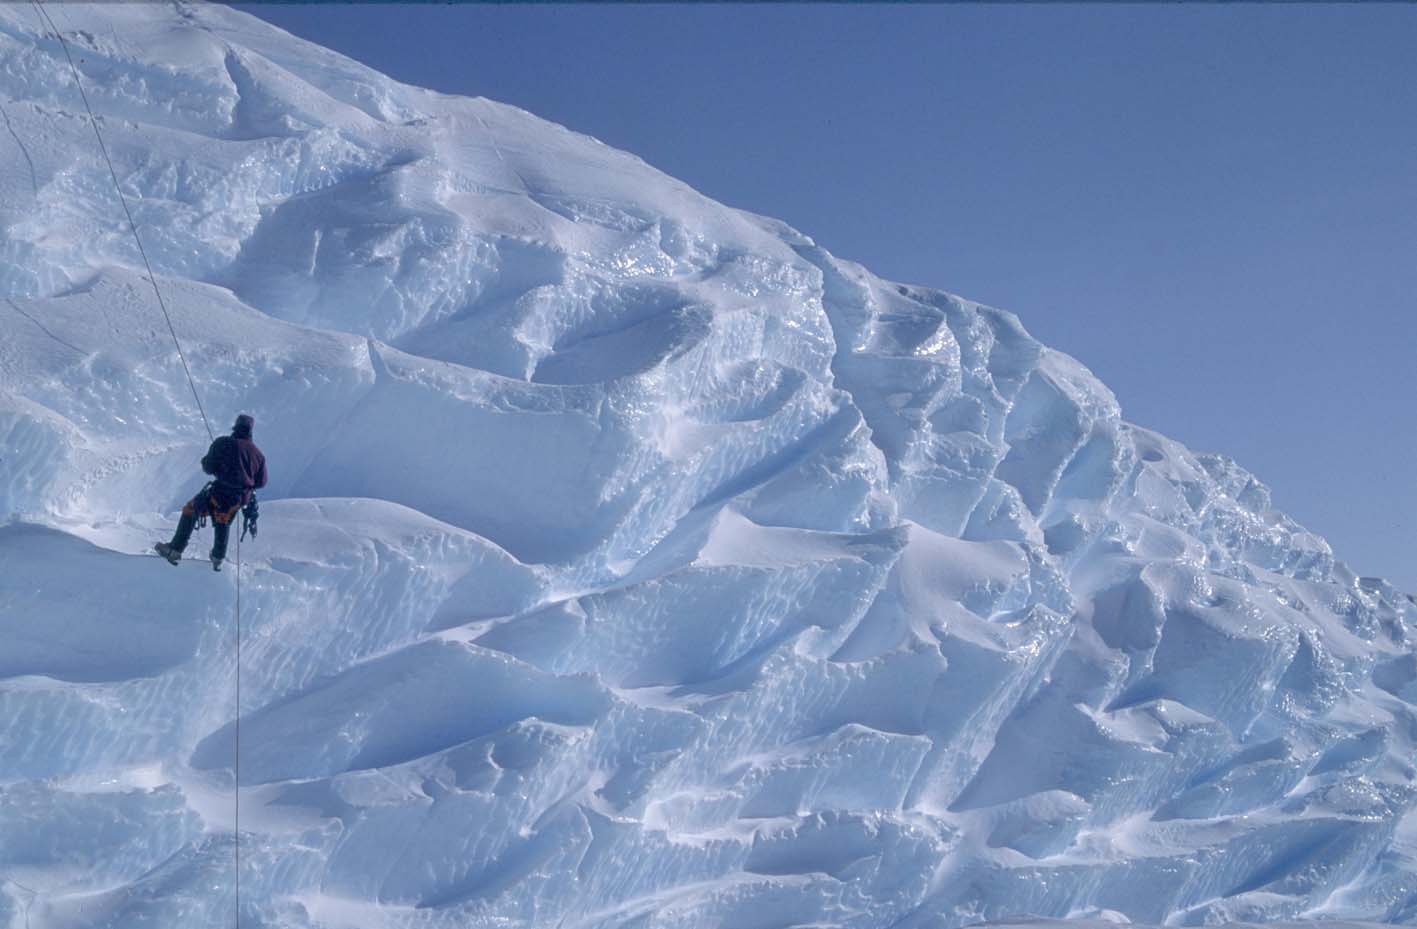 Abseiling down an ice cliff in 2nd Chasm, Brunt Ice Shelf, Antarctica